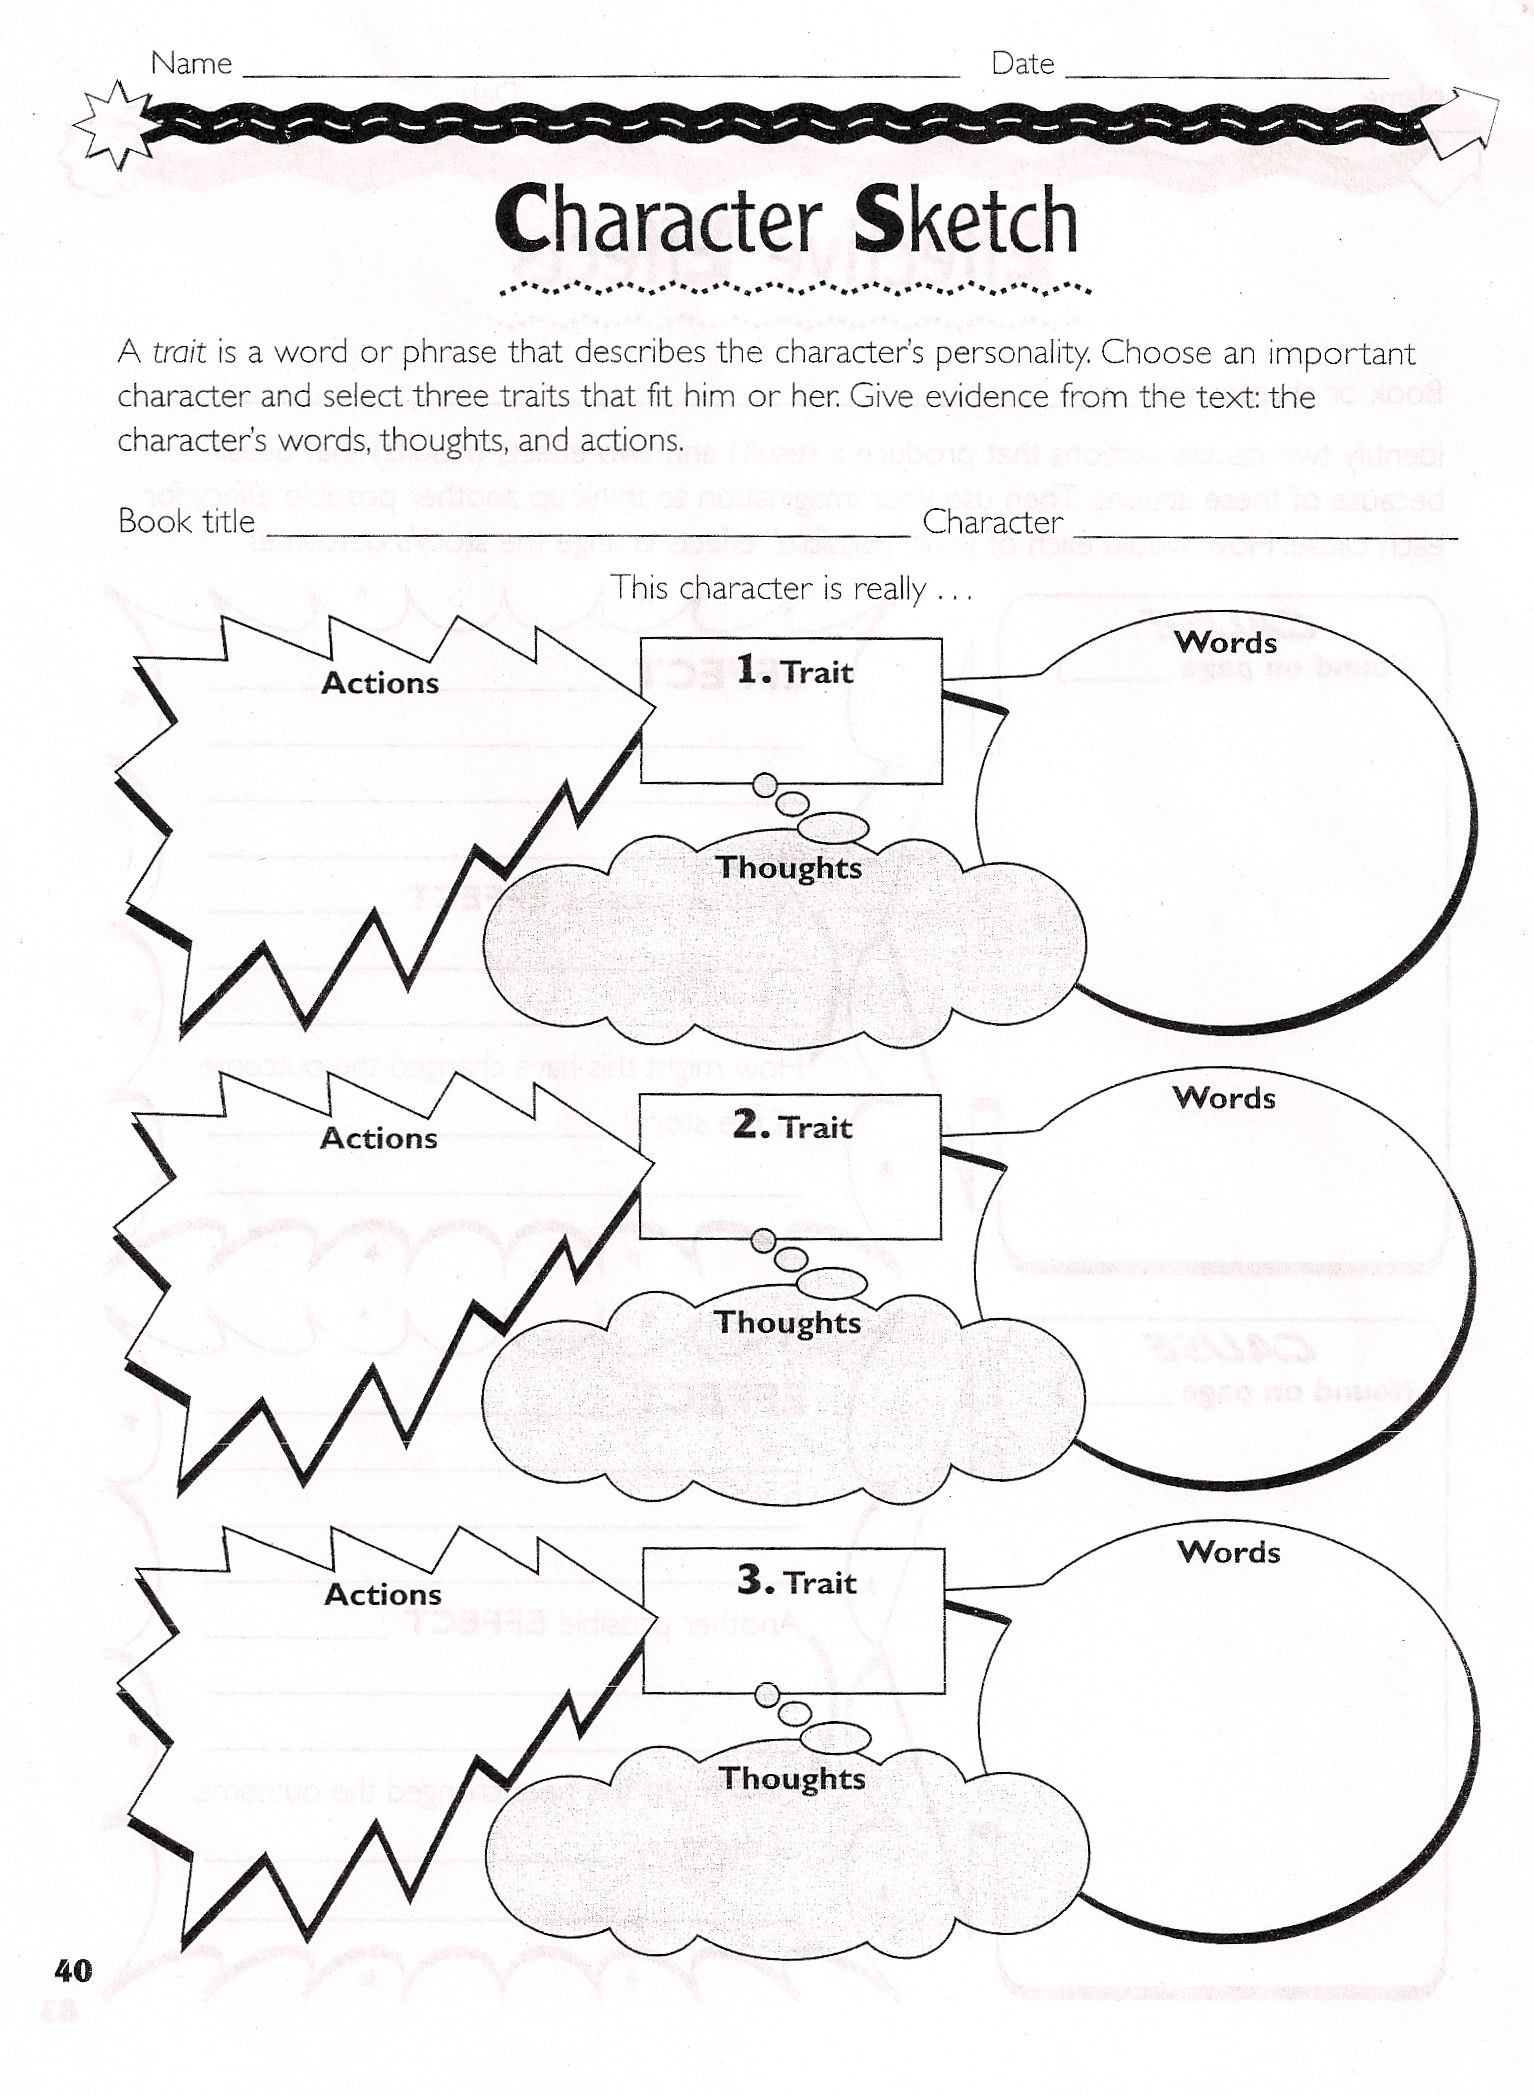 Free Math Worksheets Second Grade 2 Multiplication Multiply 2 Times whole Tens